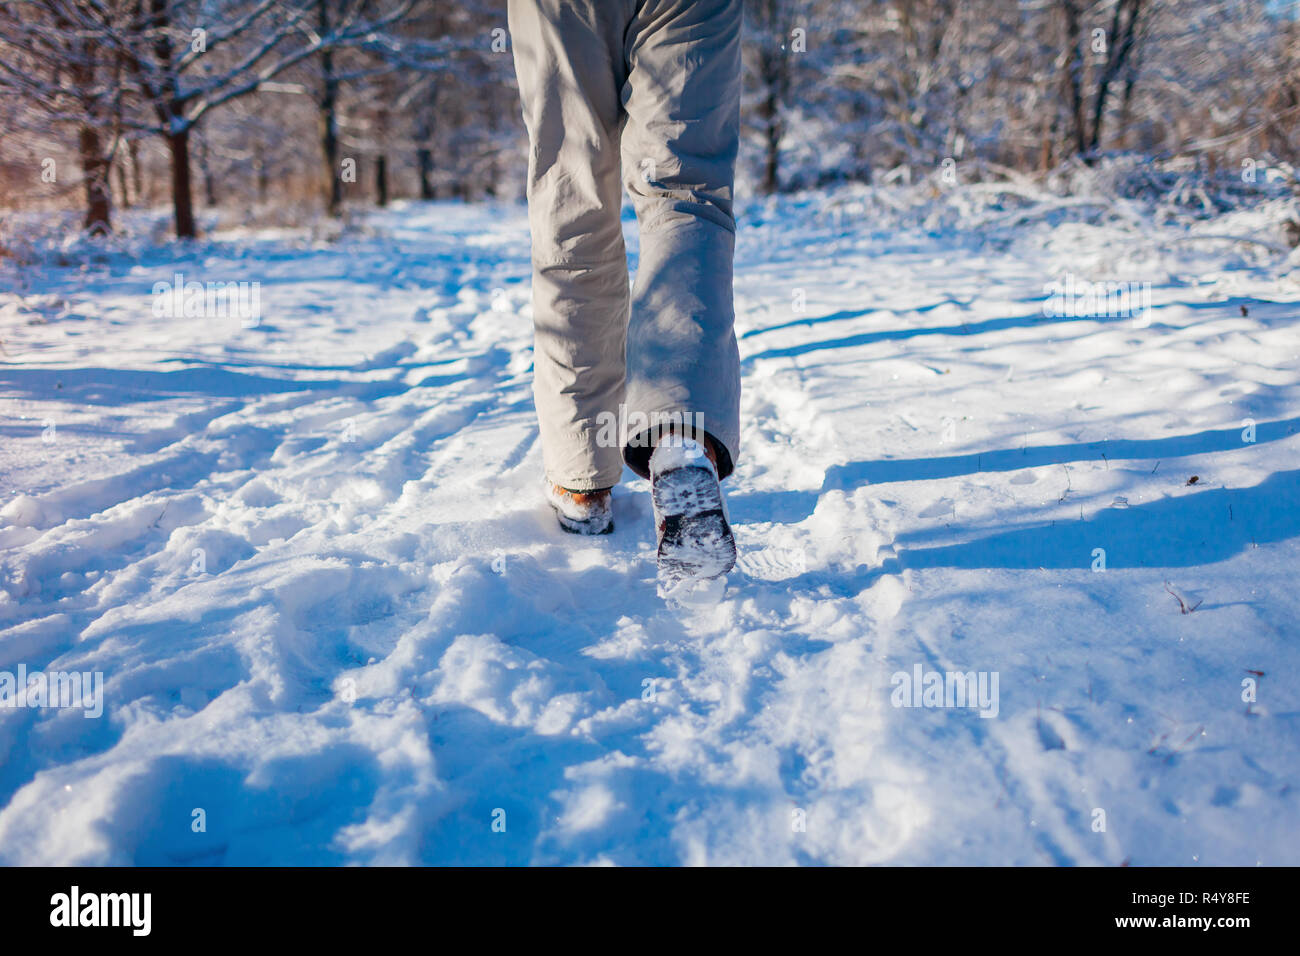 Running athlete man sprinting in winter forest. Training outside in cold snowy weather. Active healthy lifestyle. Closeup of shoes Stock Photo